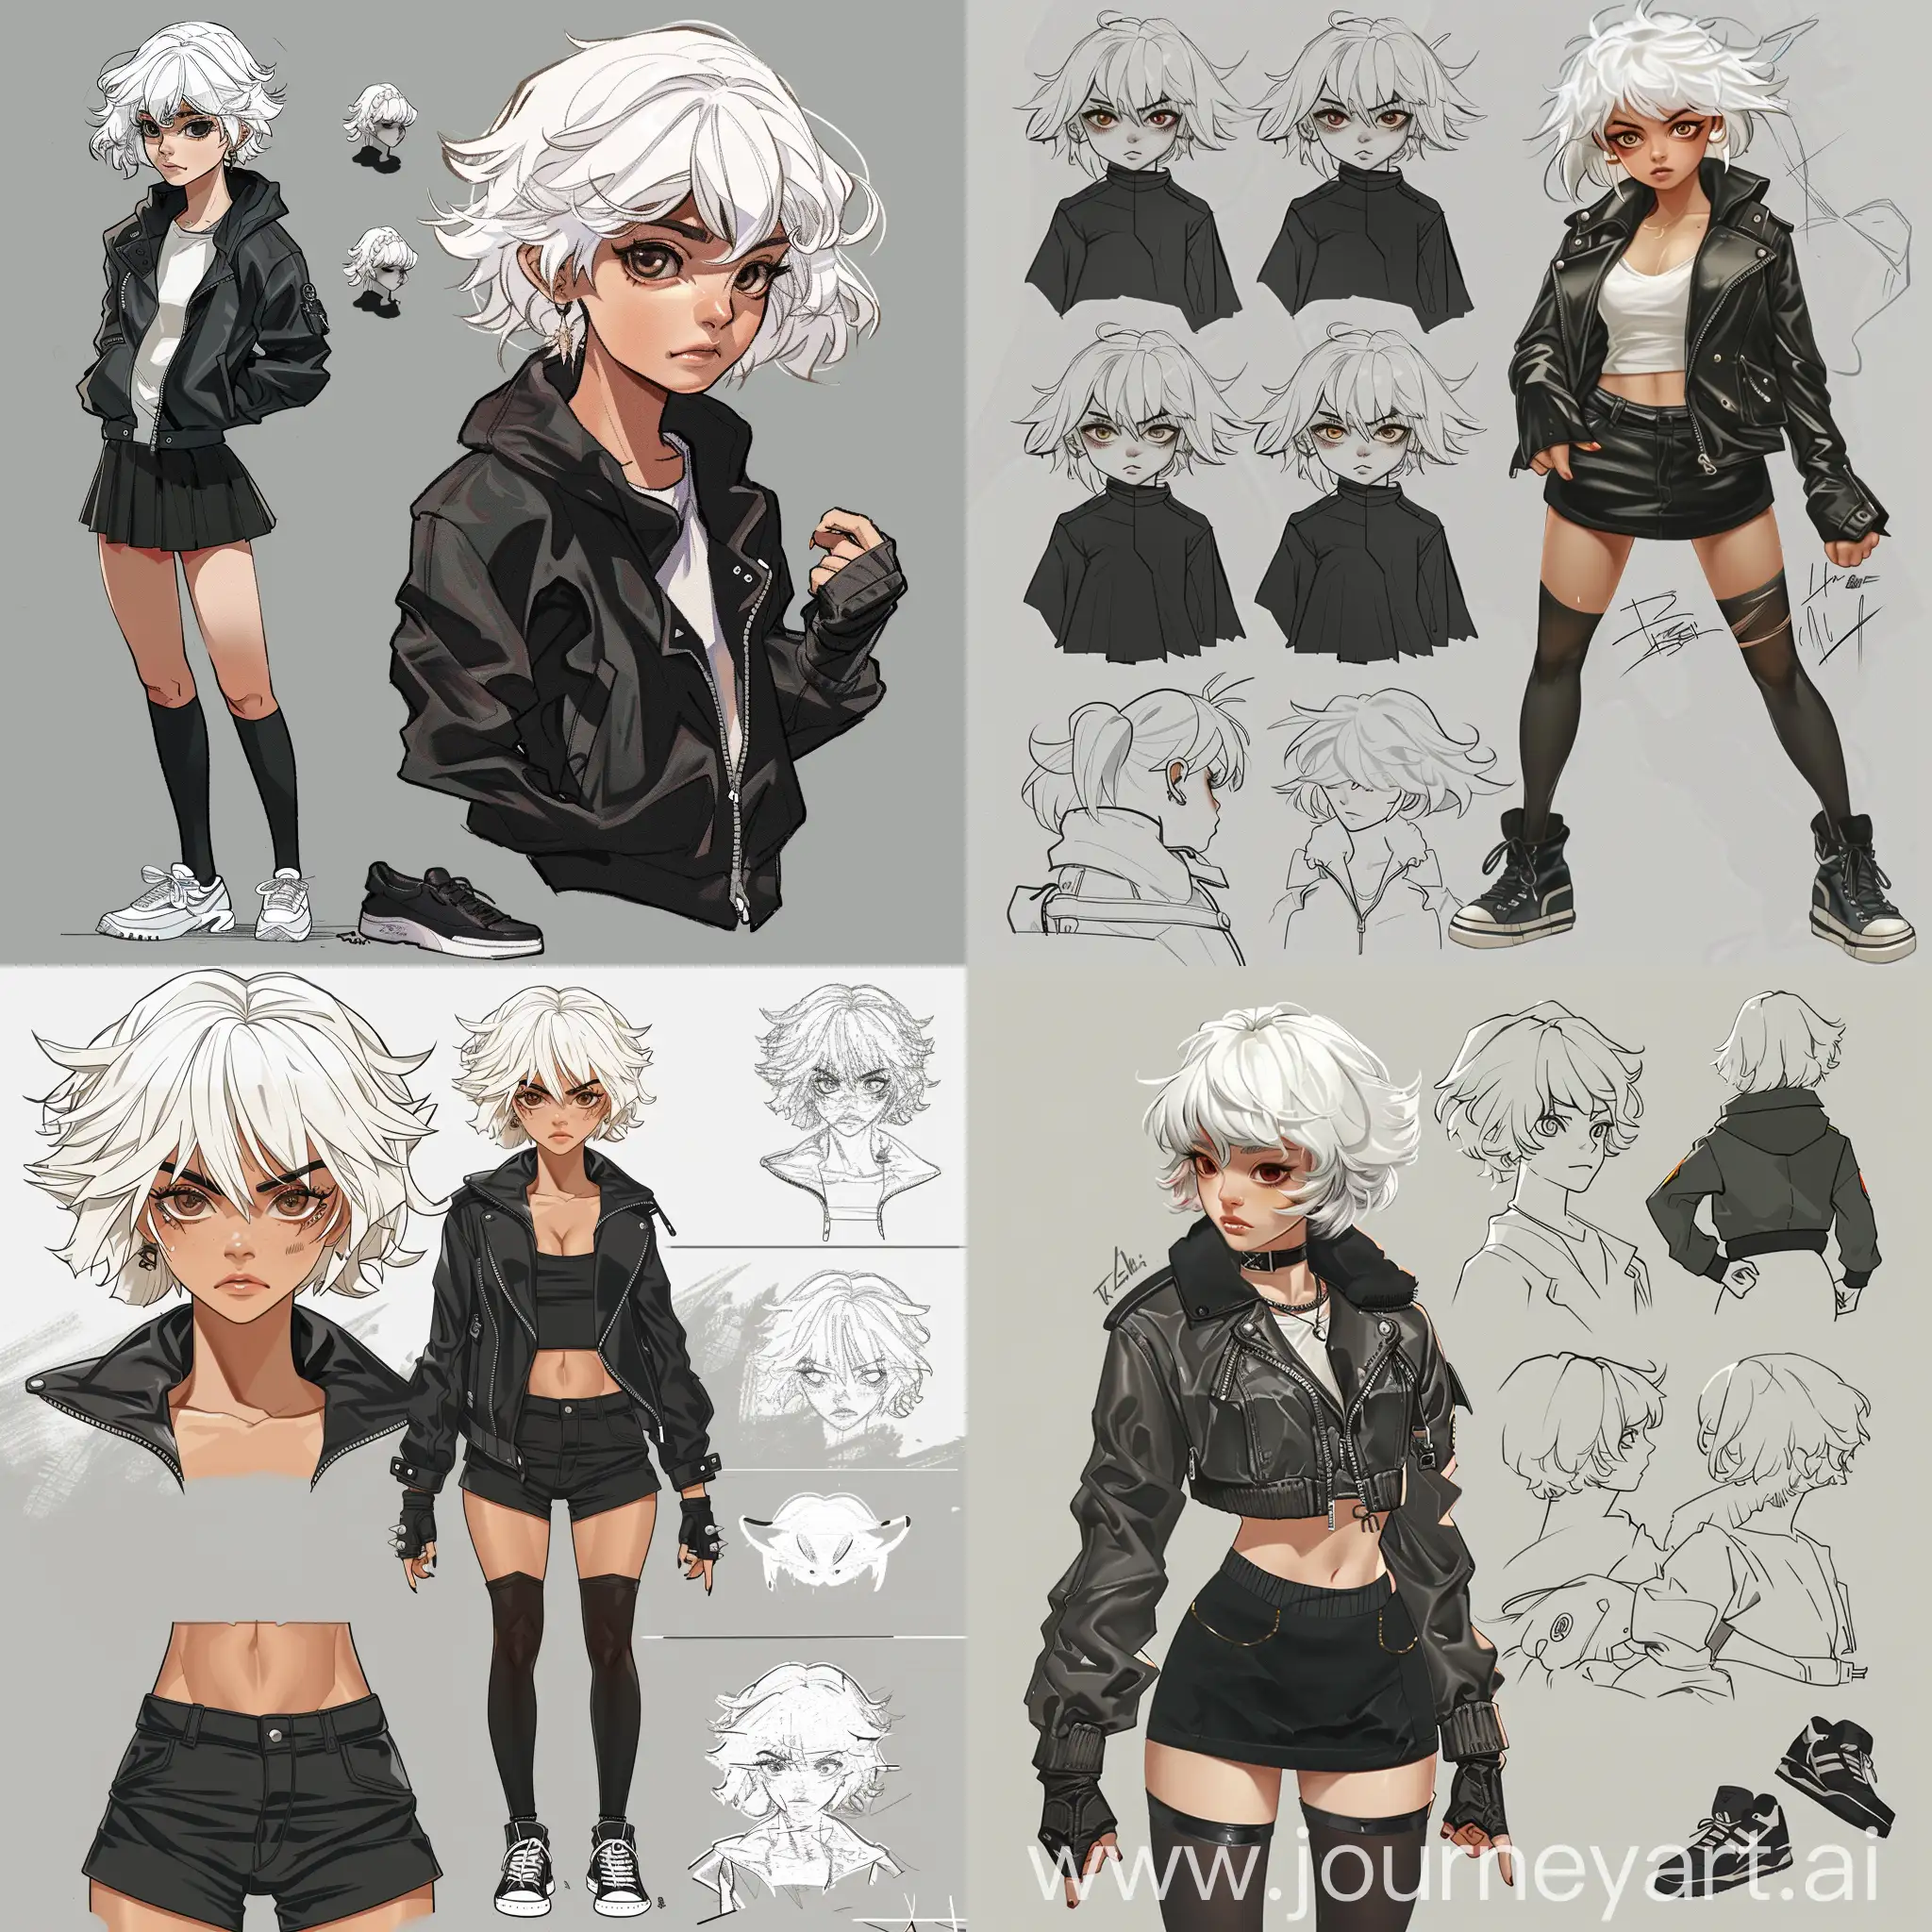 Anime-Character-Design-Badass-Young-Woman-with-Fluffy-White-Hair-and-Leather-Gloves